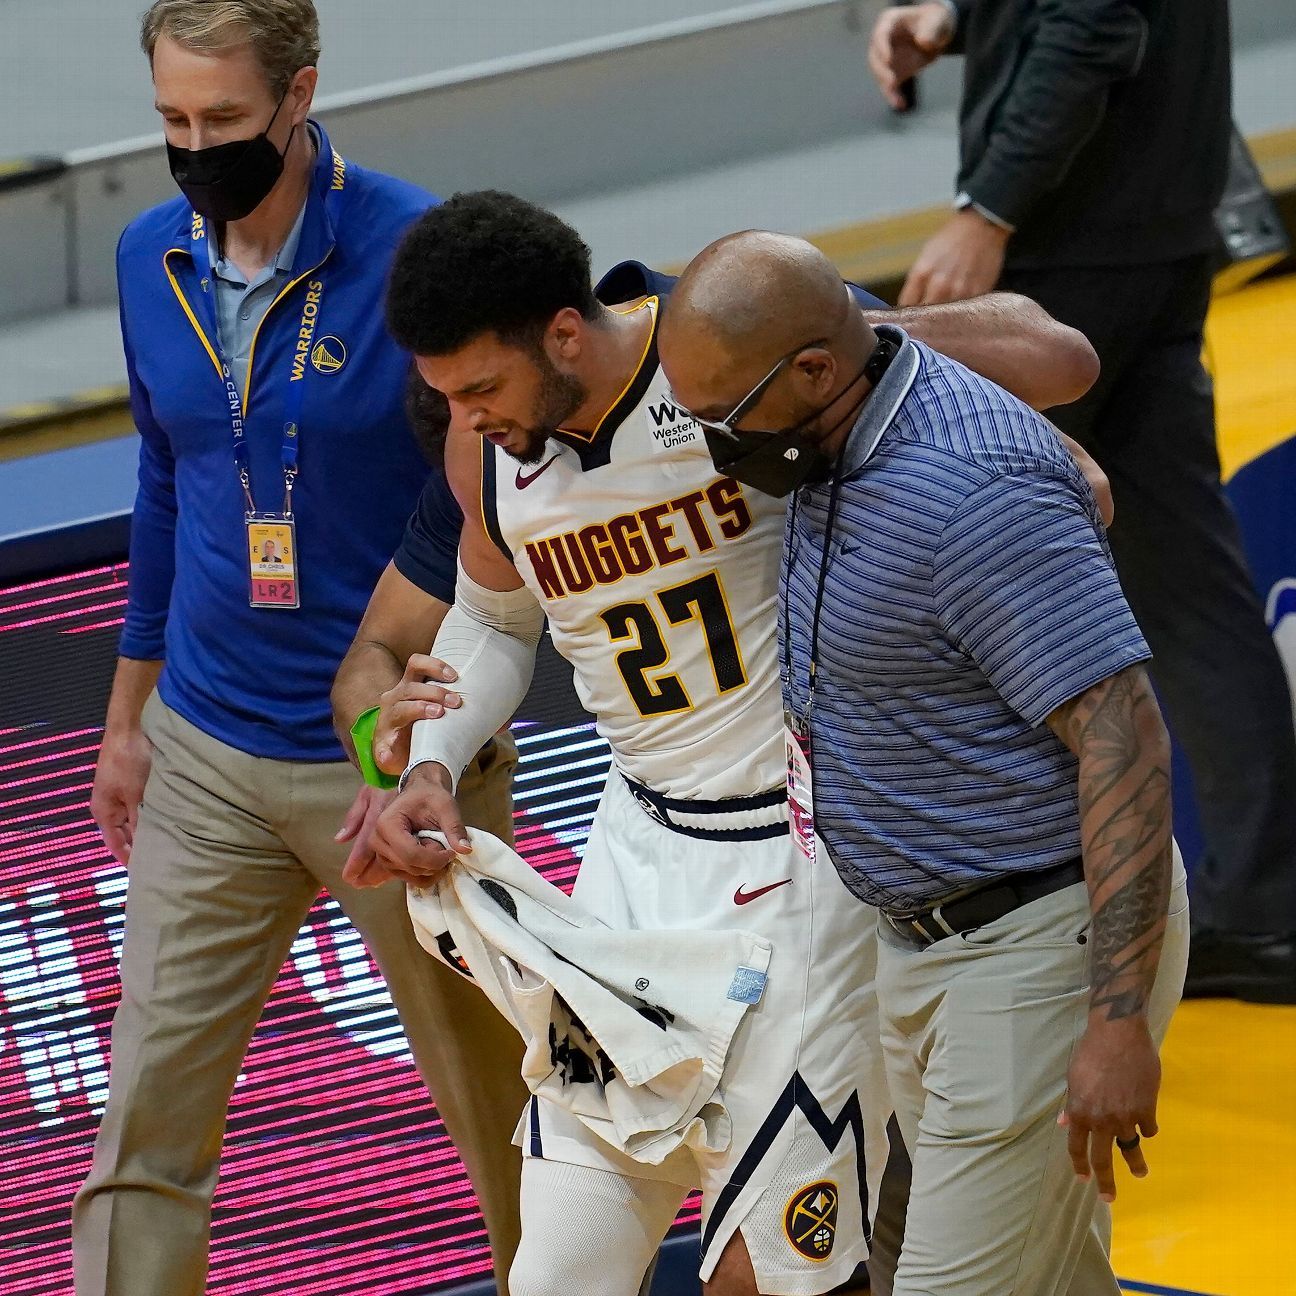 Nuggets star Michael Malone Jamal Murray “devastated” after injury in ACL season finale